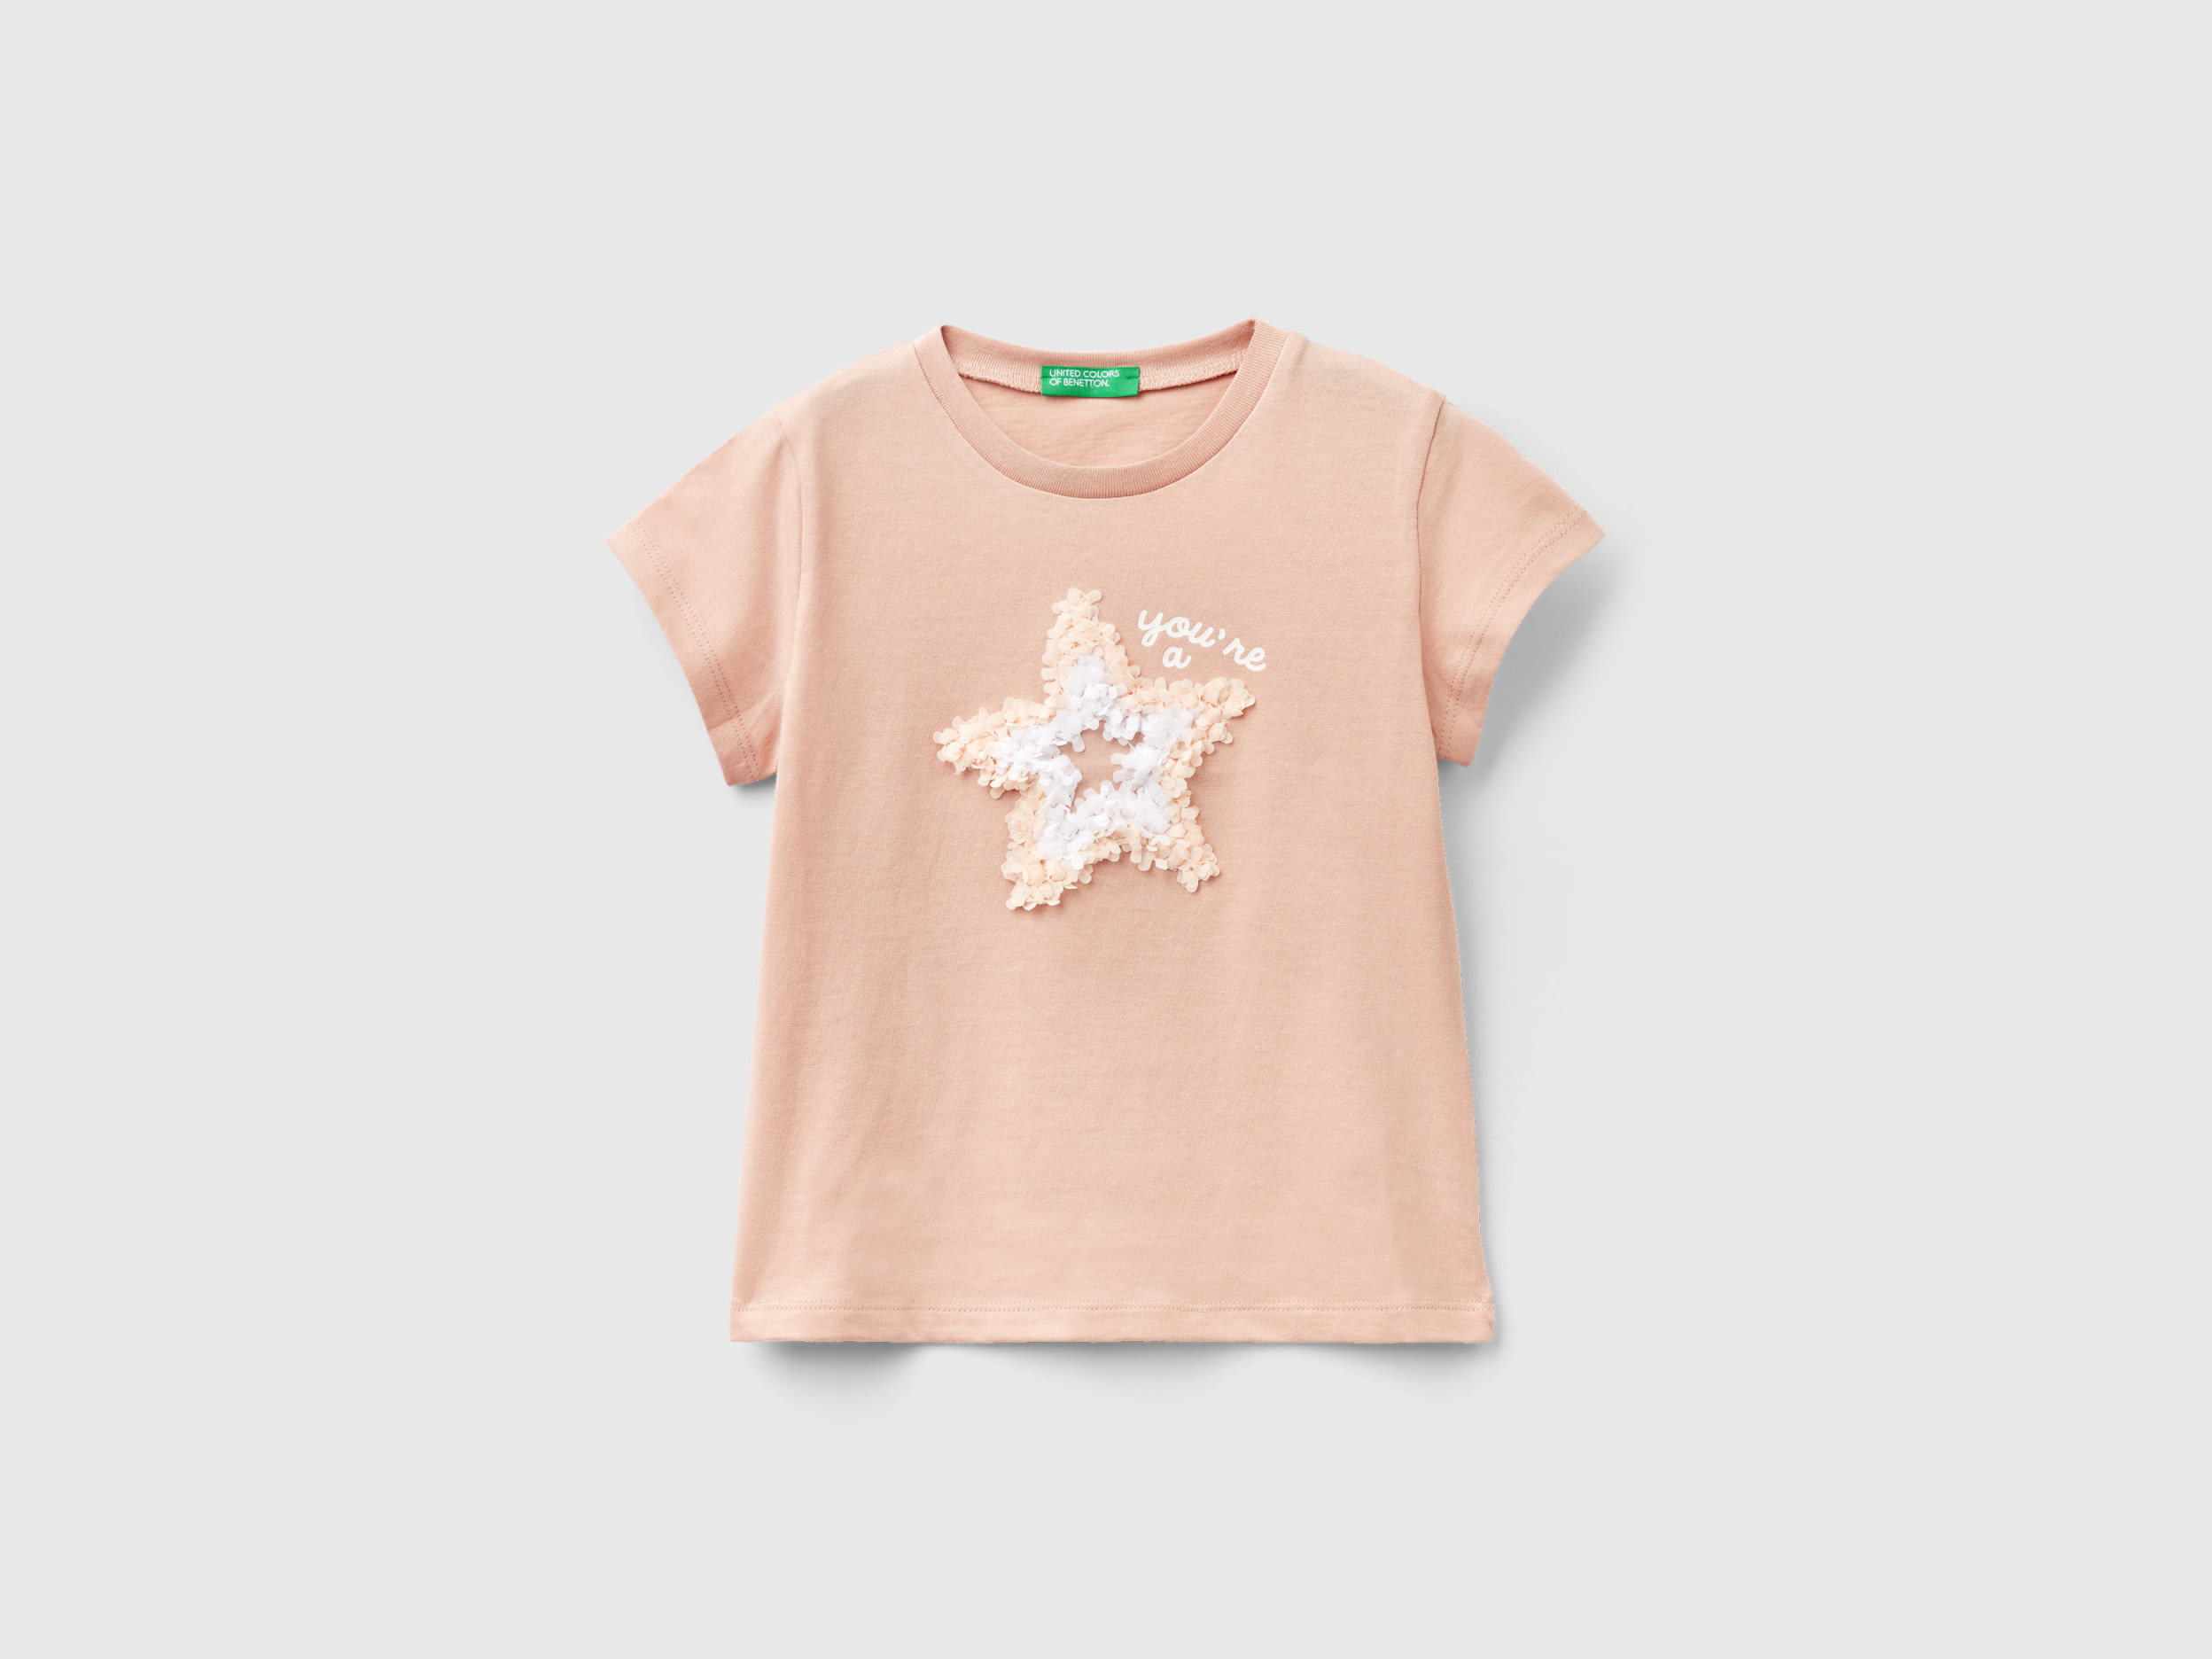 Image of Benetton, T-shirt With Petal Effect Applique, size 104, Nude, Kids